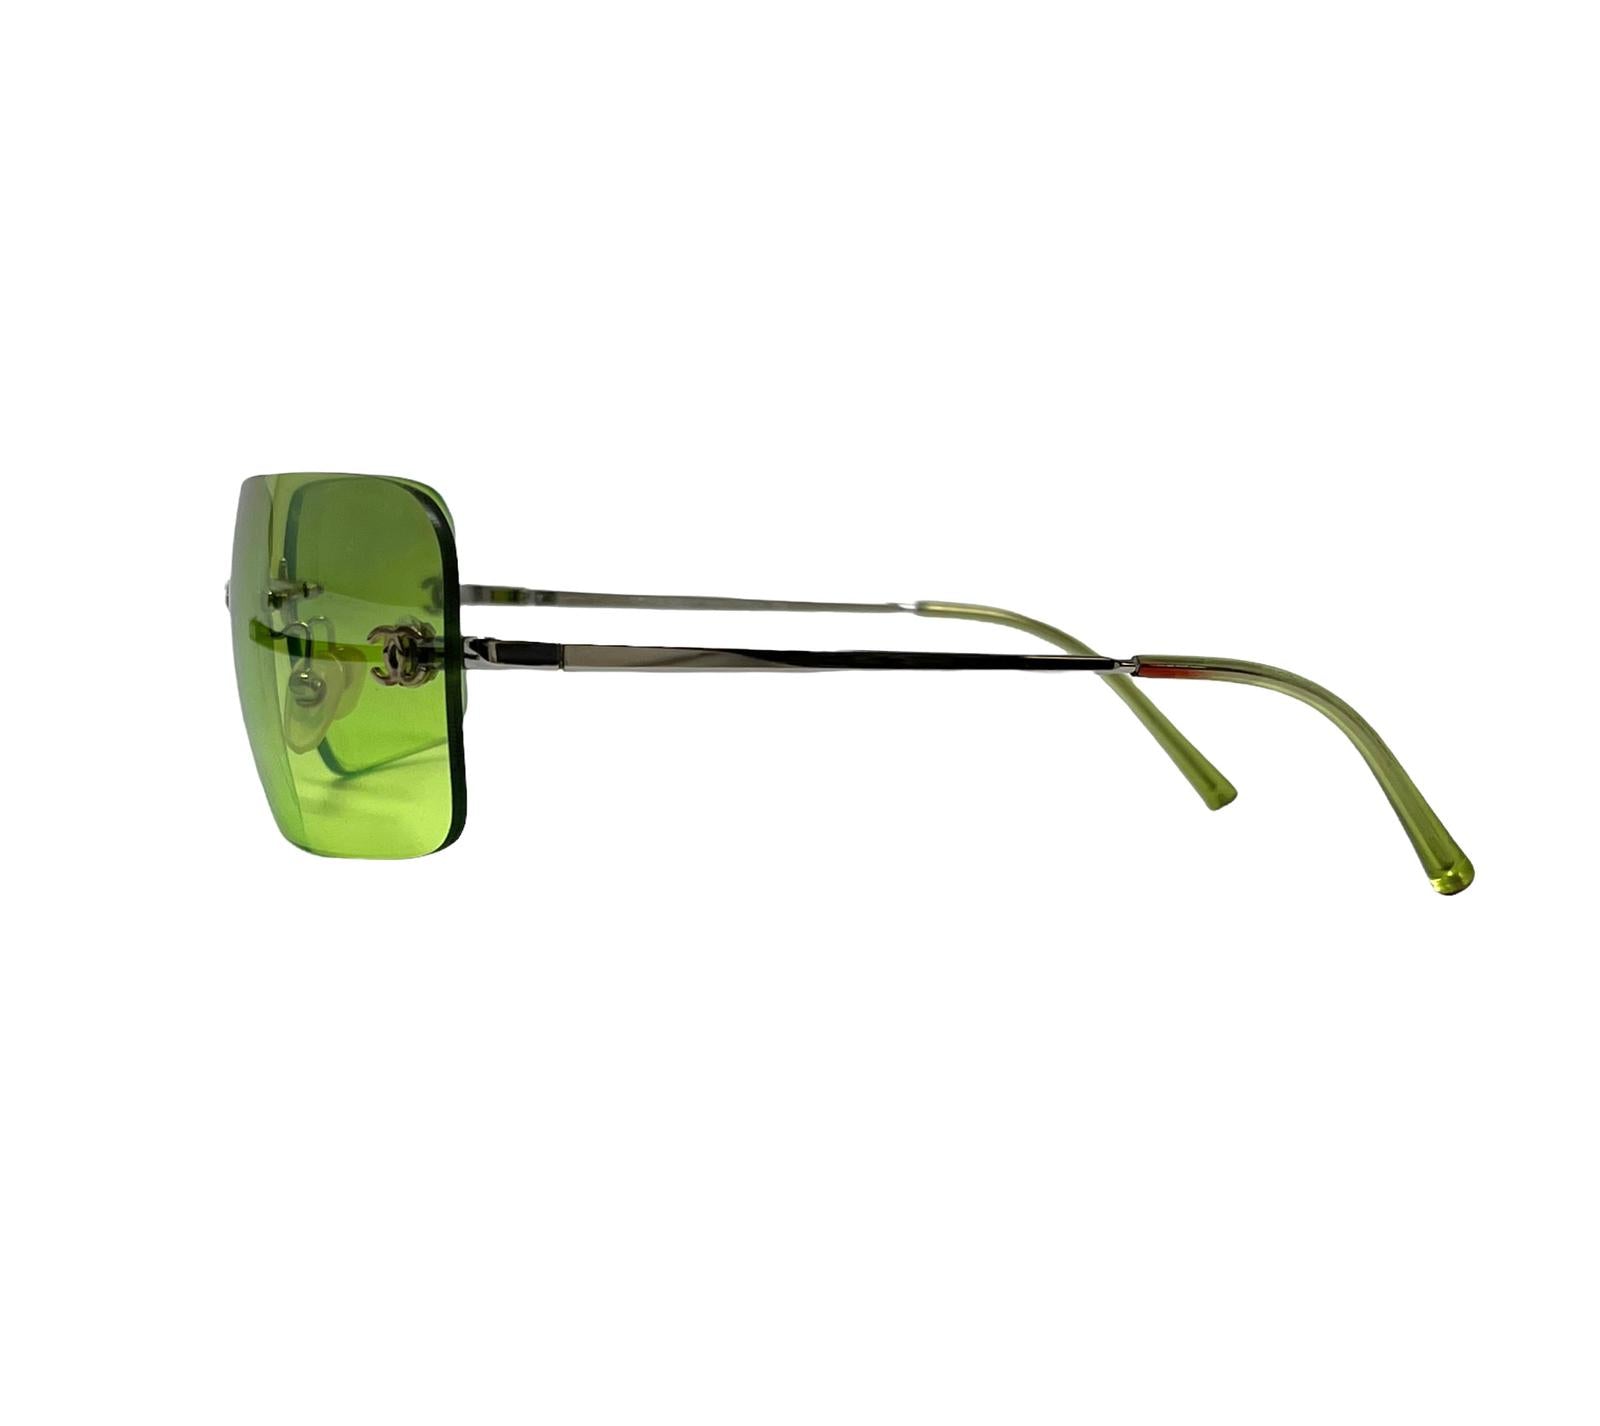 Chanel Lime Green Rimless Sumglasses